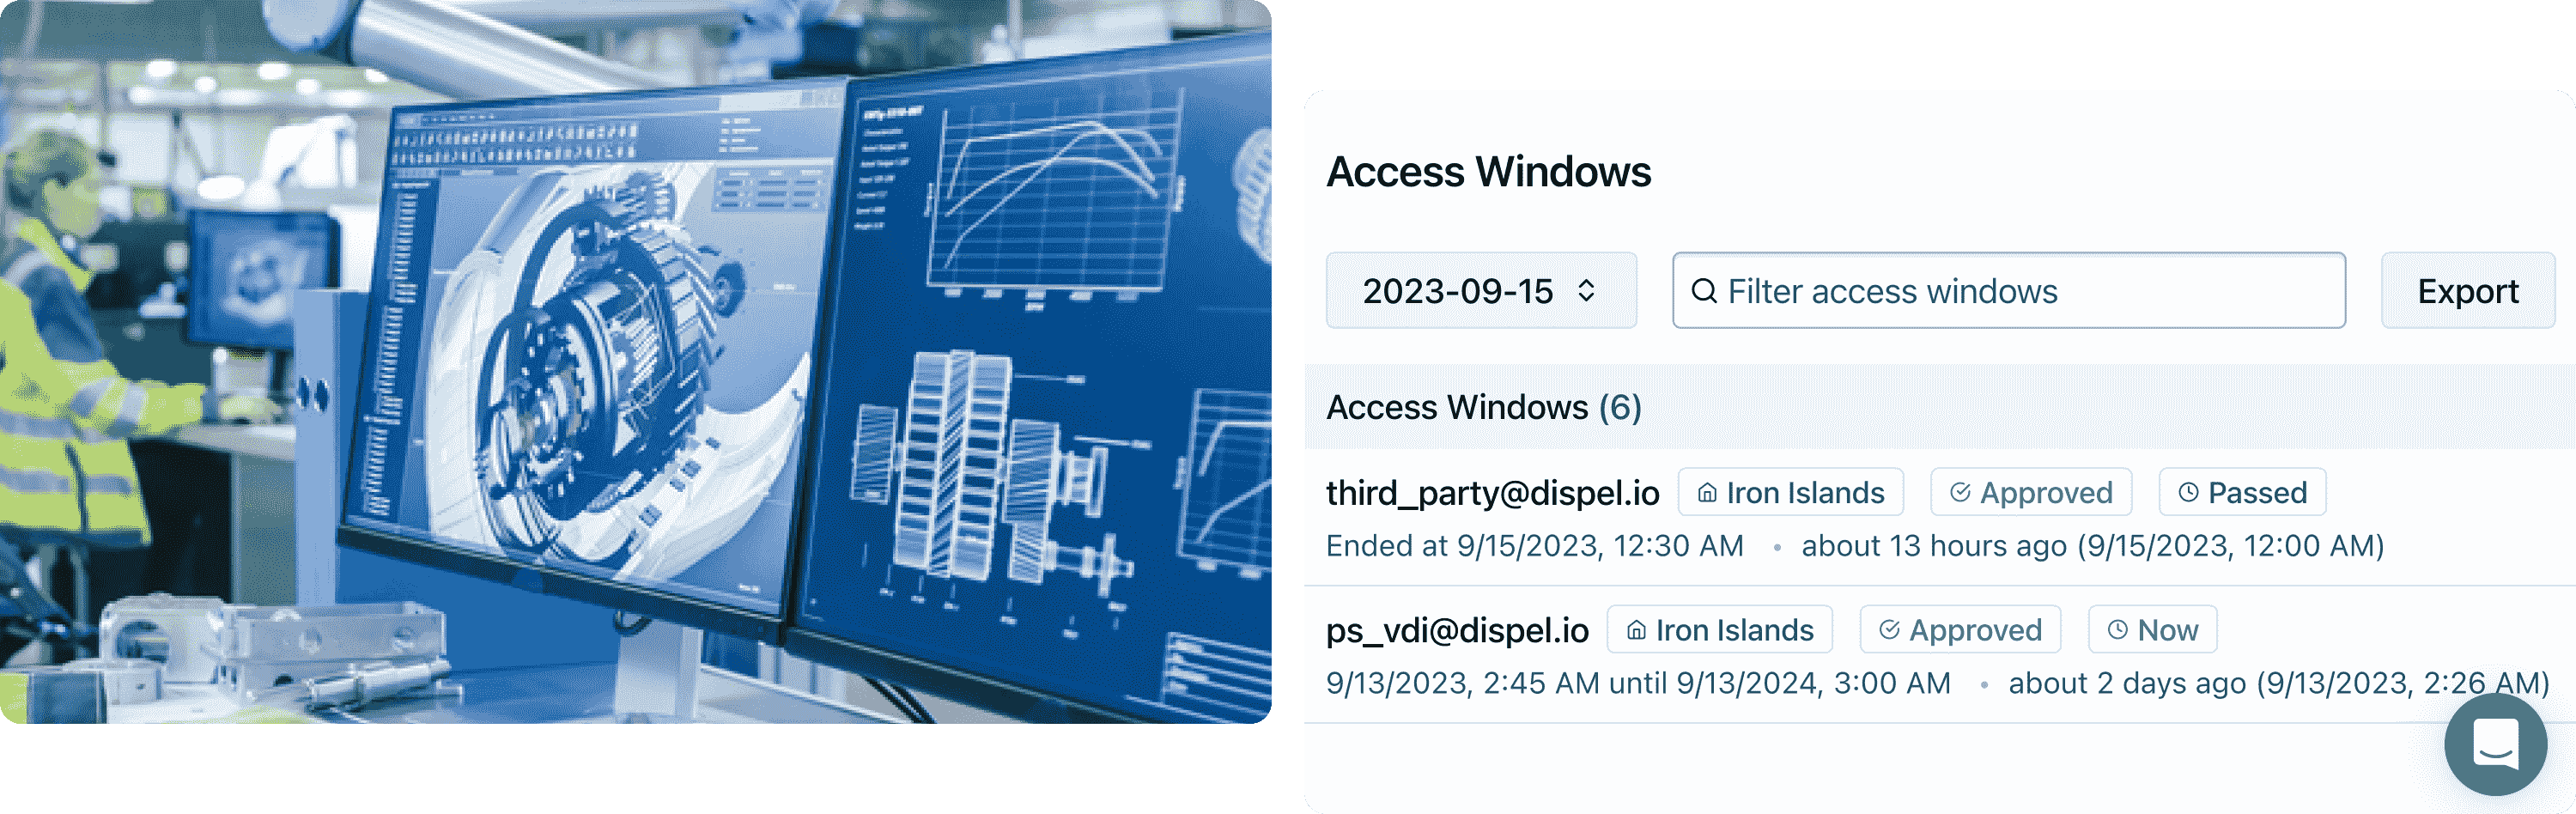 Image showing an access window to a water utility